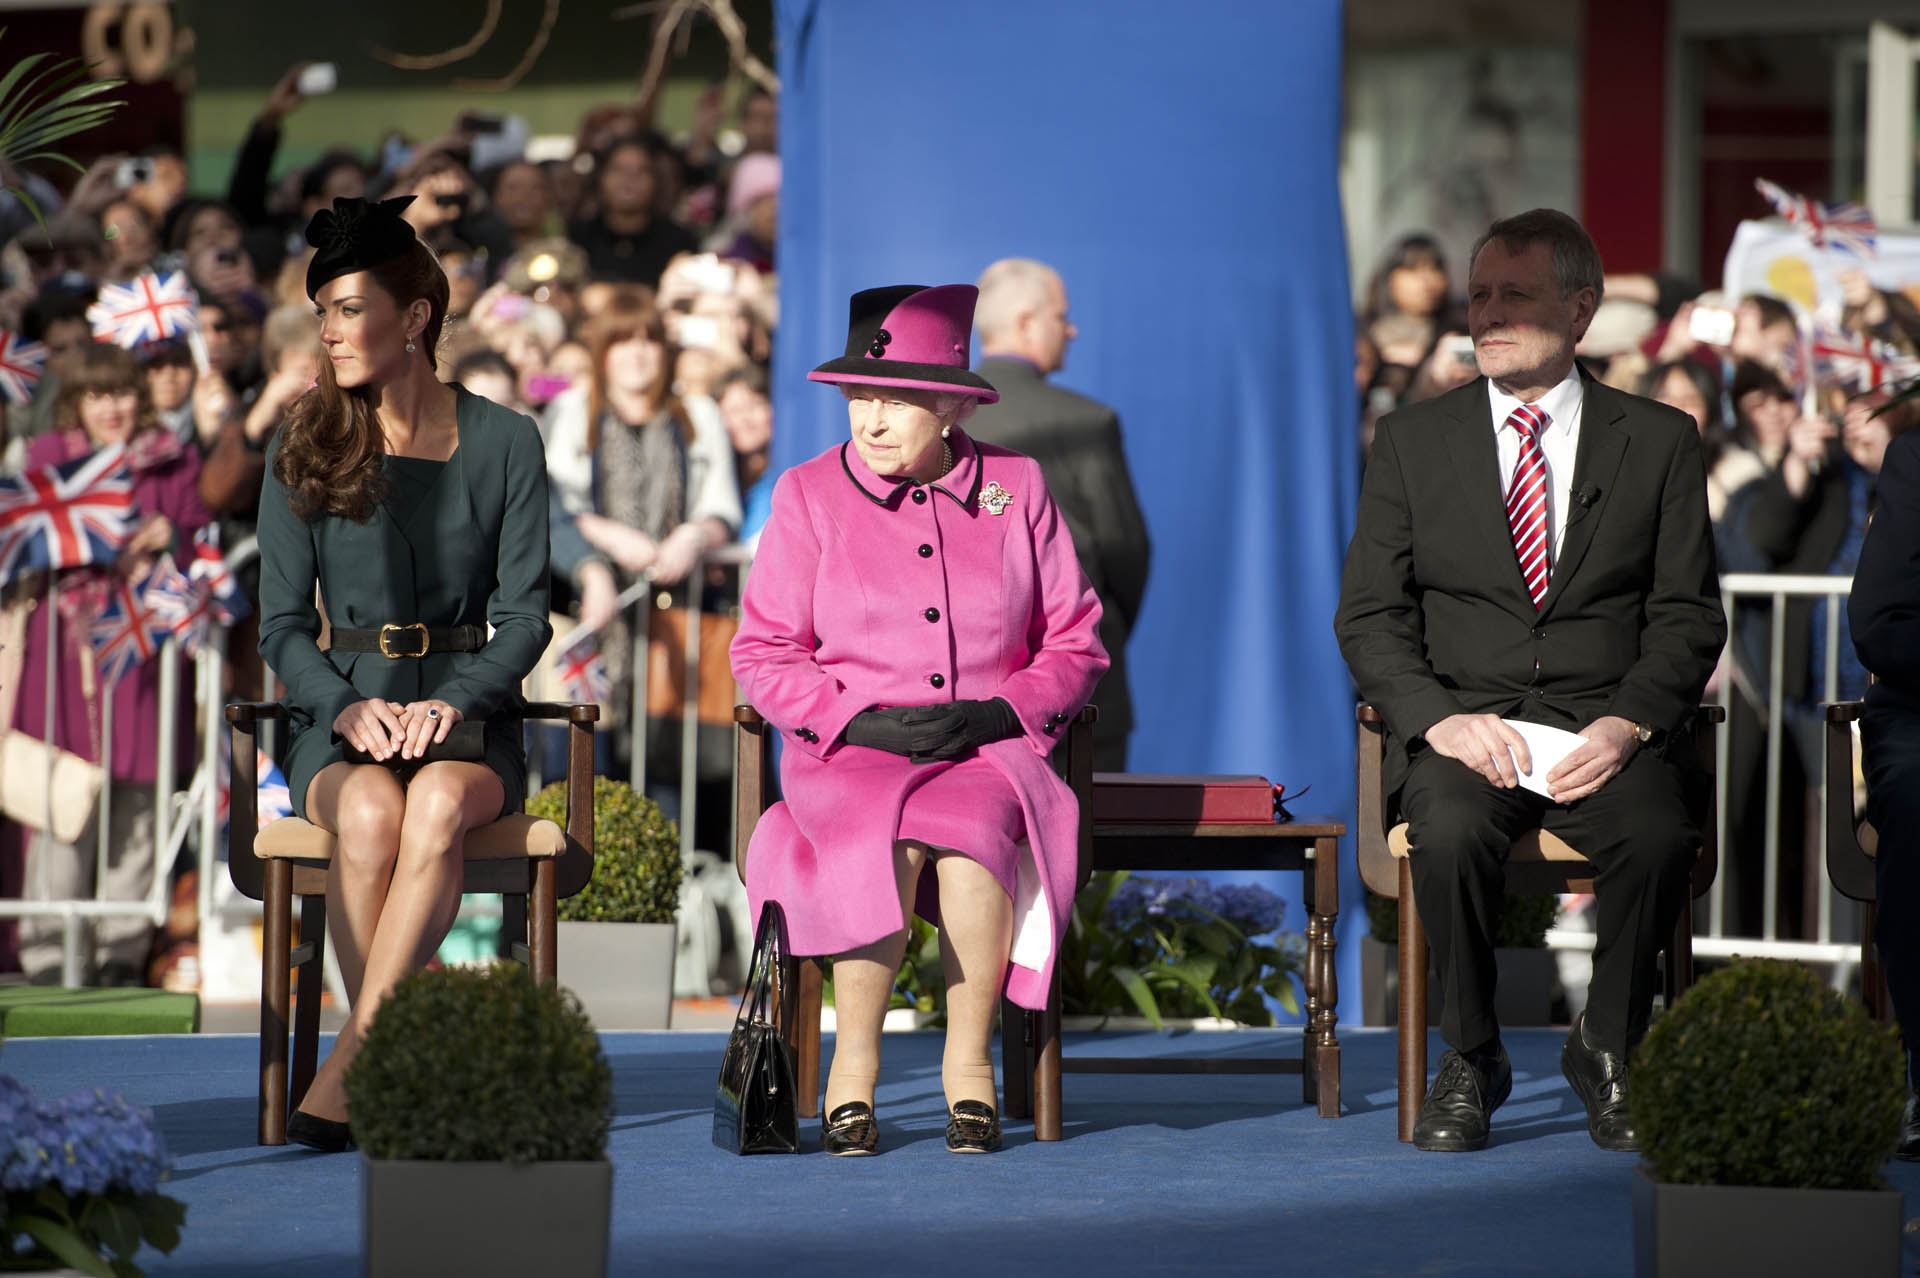 The Queen watching performers in Leicester, celebrating her Diamond Jubilee, 2012 - 